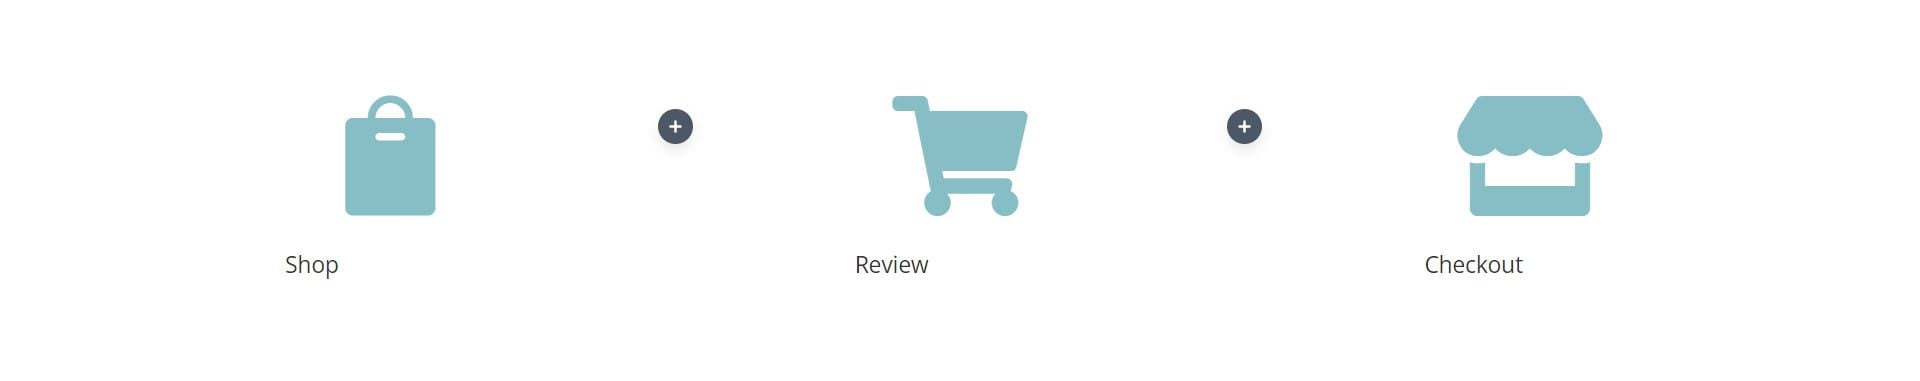 The WooCommerce cart timeline without styling